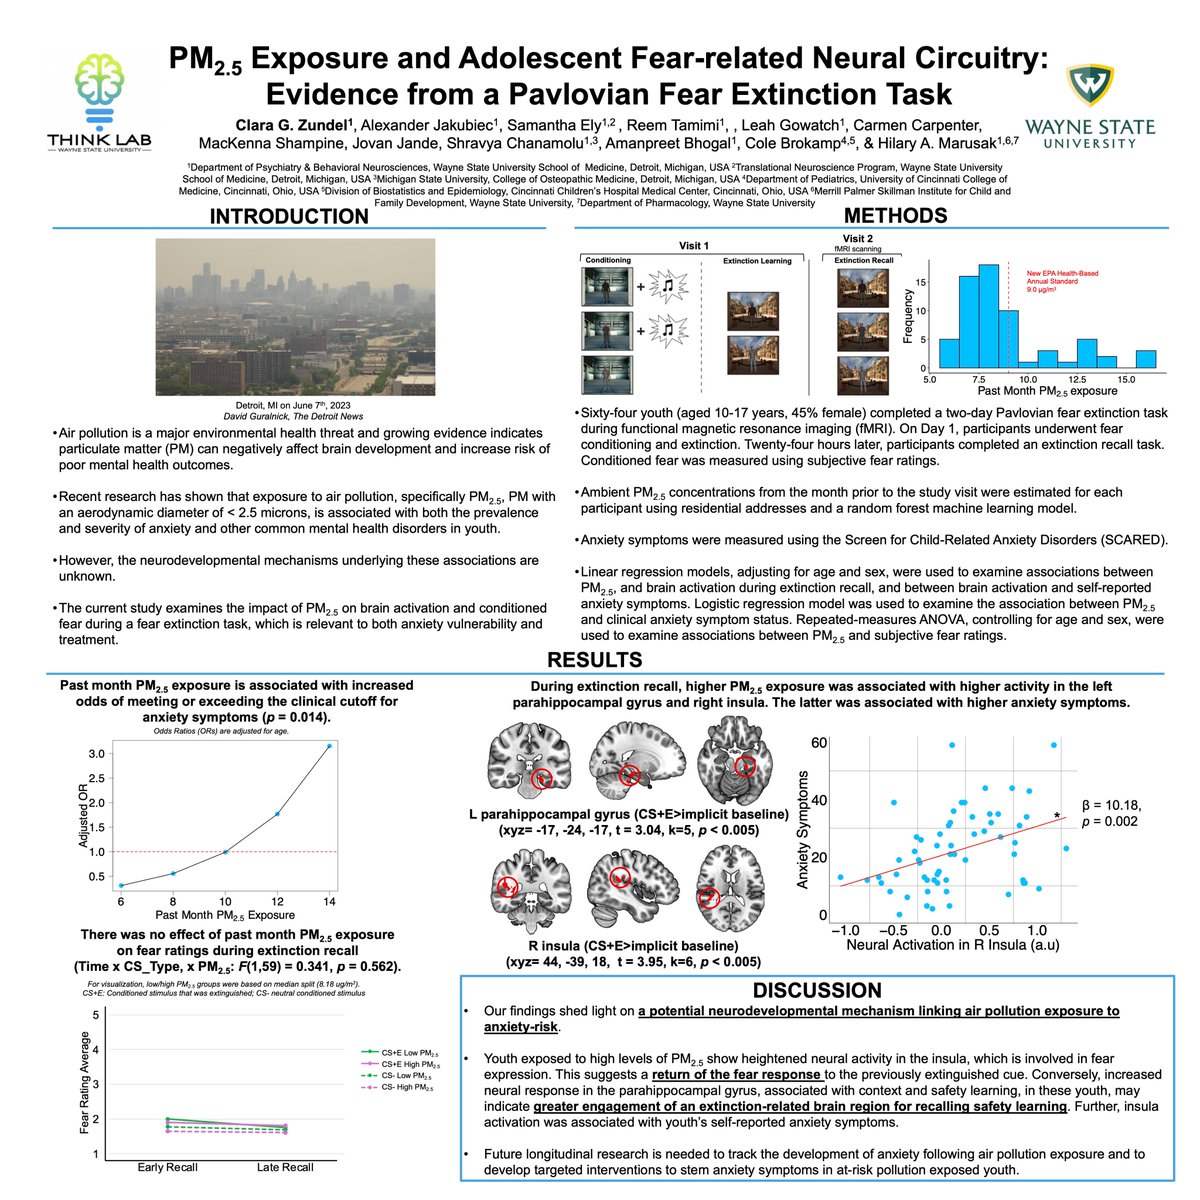 Attending #SOBP2024? Make sure you stop by the poster session on Friday! I'm presenting some preliminary findings from my F32, examining the impact of #AirPollution on brain function & mental health in Detroit-area youth. #EnvironmentalPsychiatry #neuro